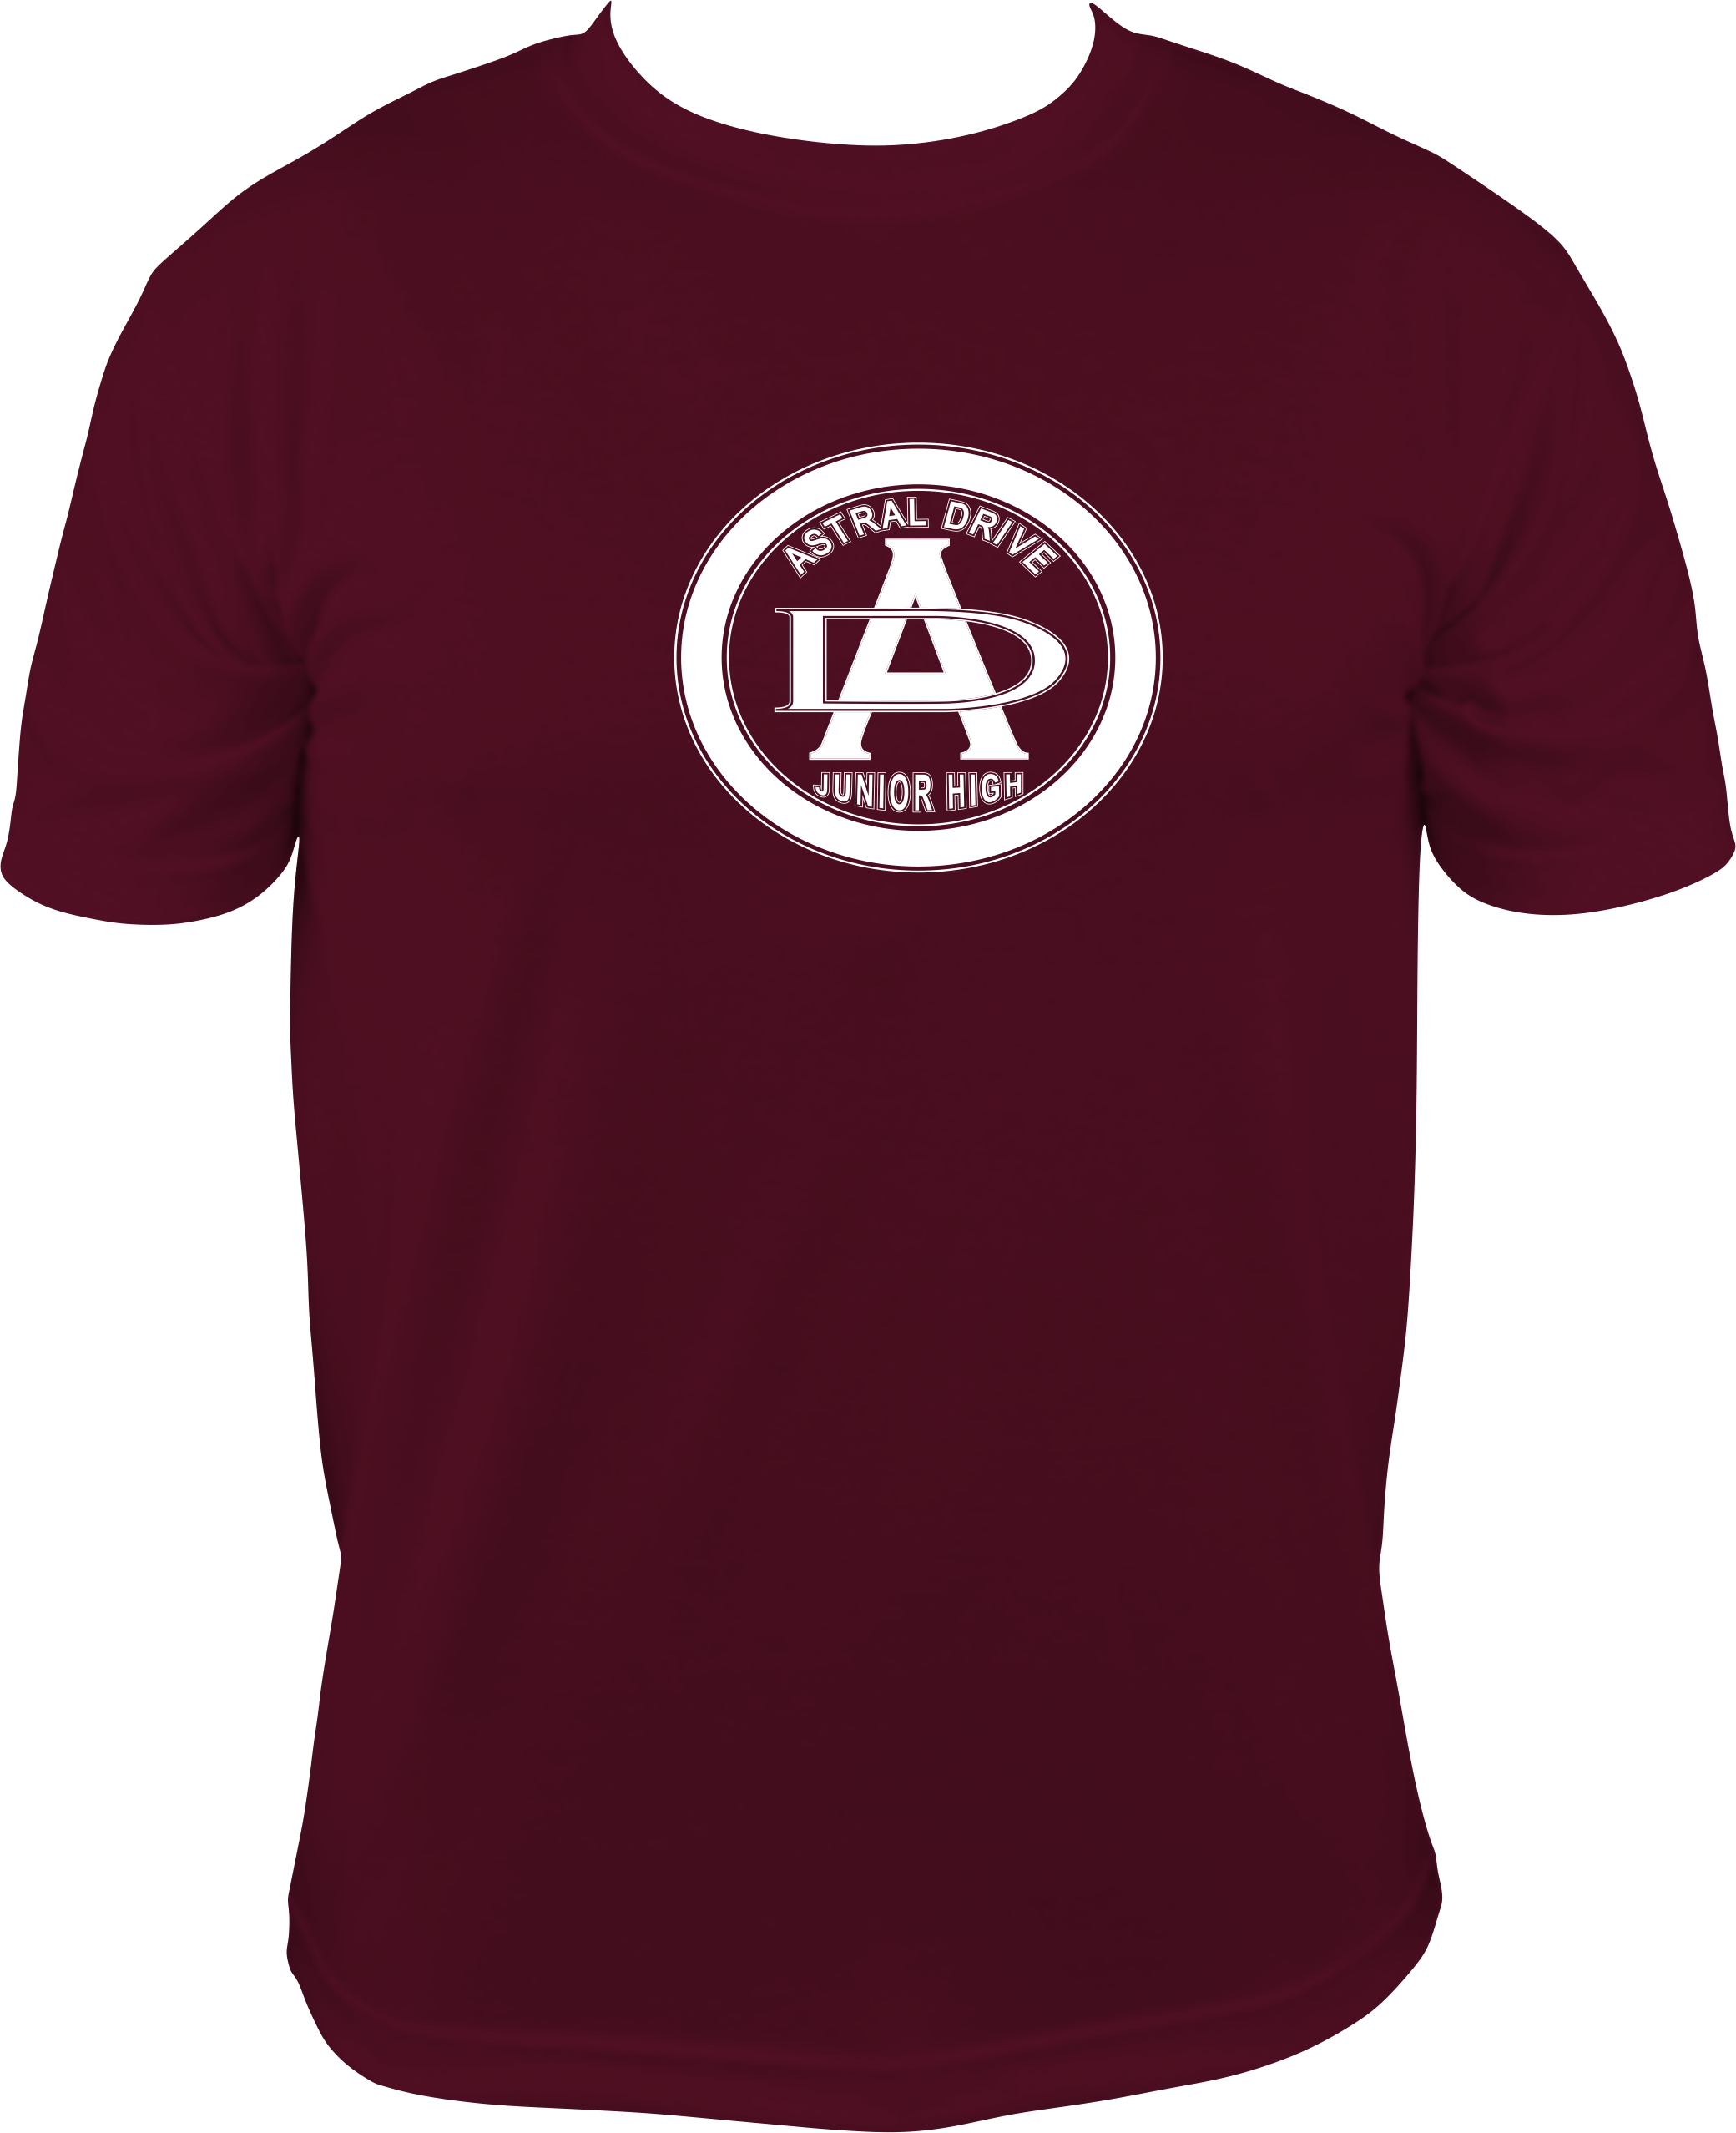 Maroon and White Logo - Gildan T-Shirt (Maroon) Astral Drive logo across front (White ...